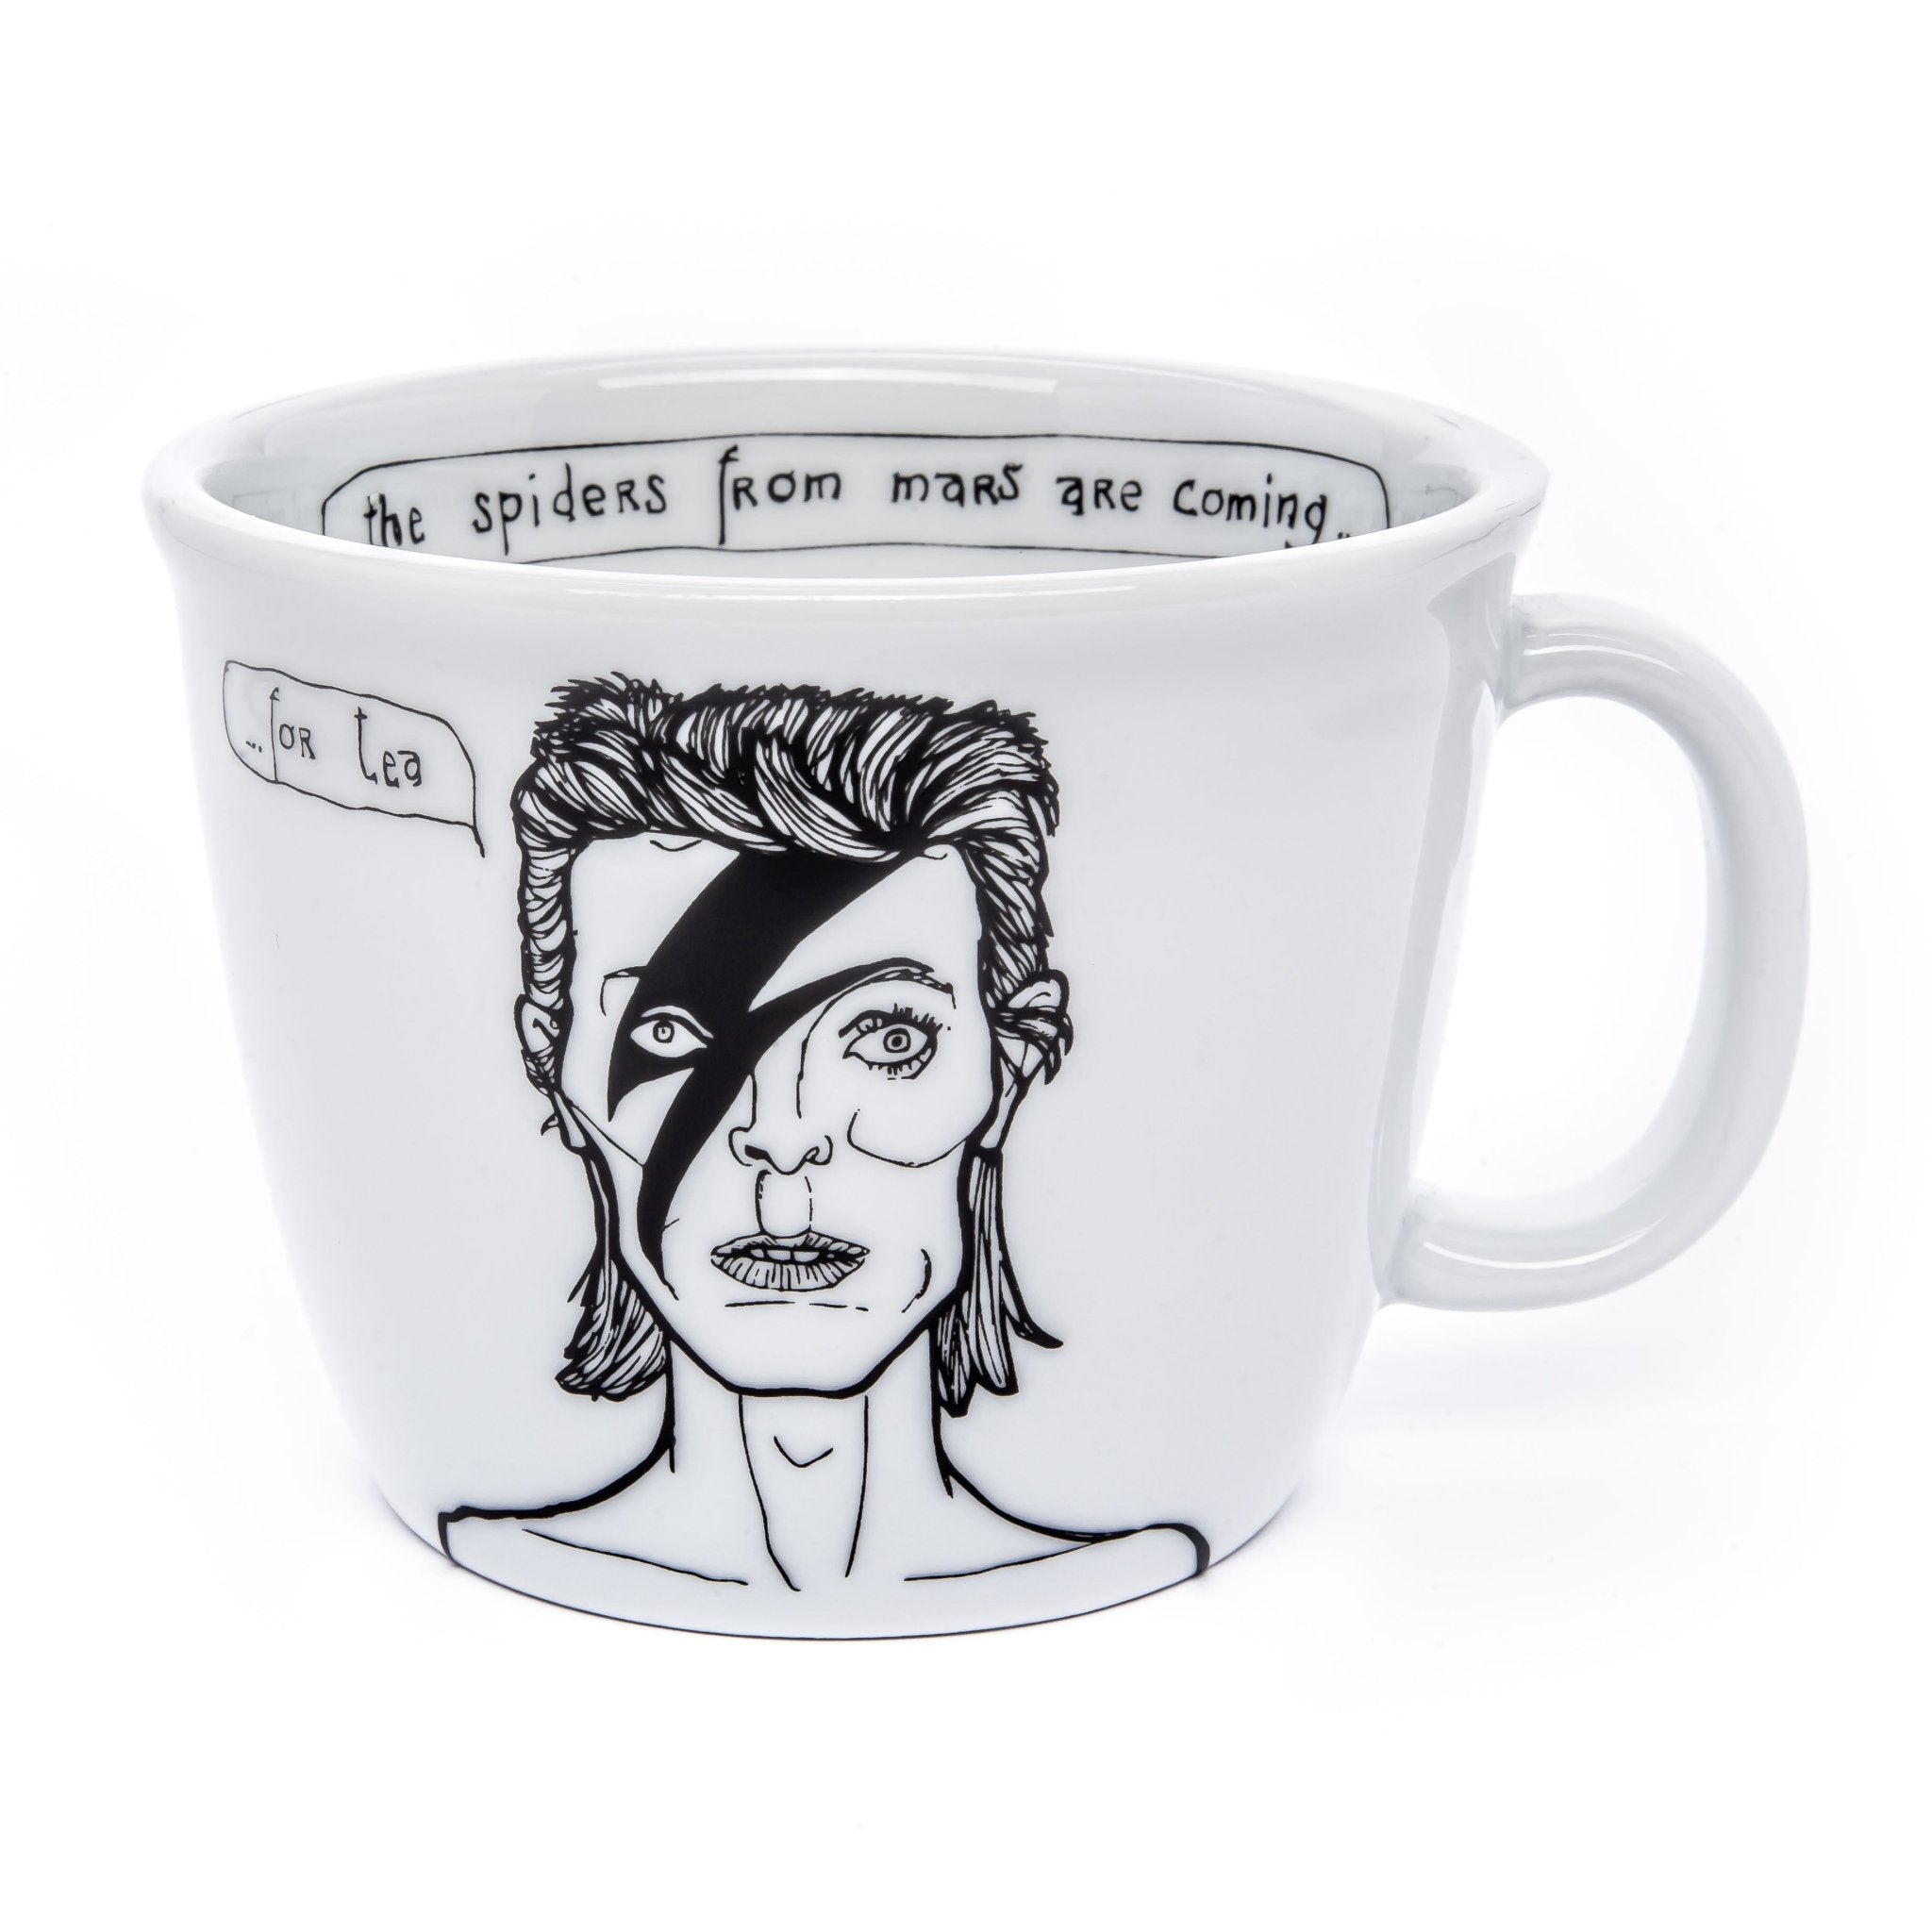 Porcelain cup inspired by David Bowie